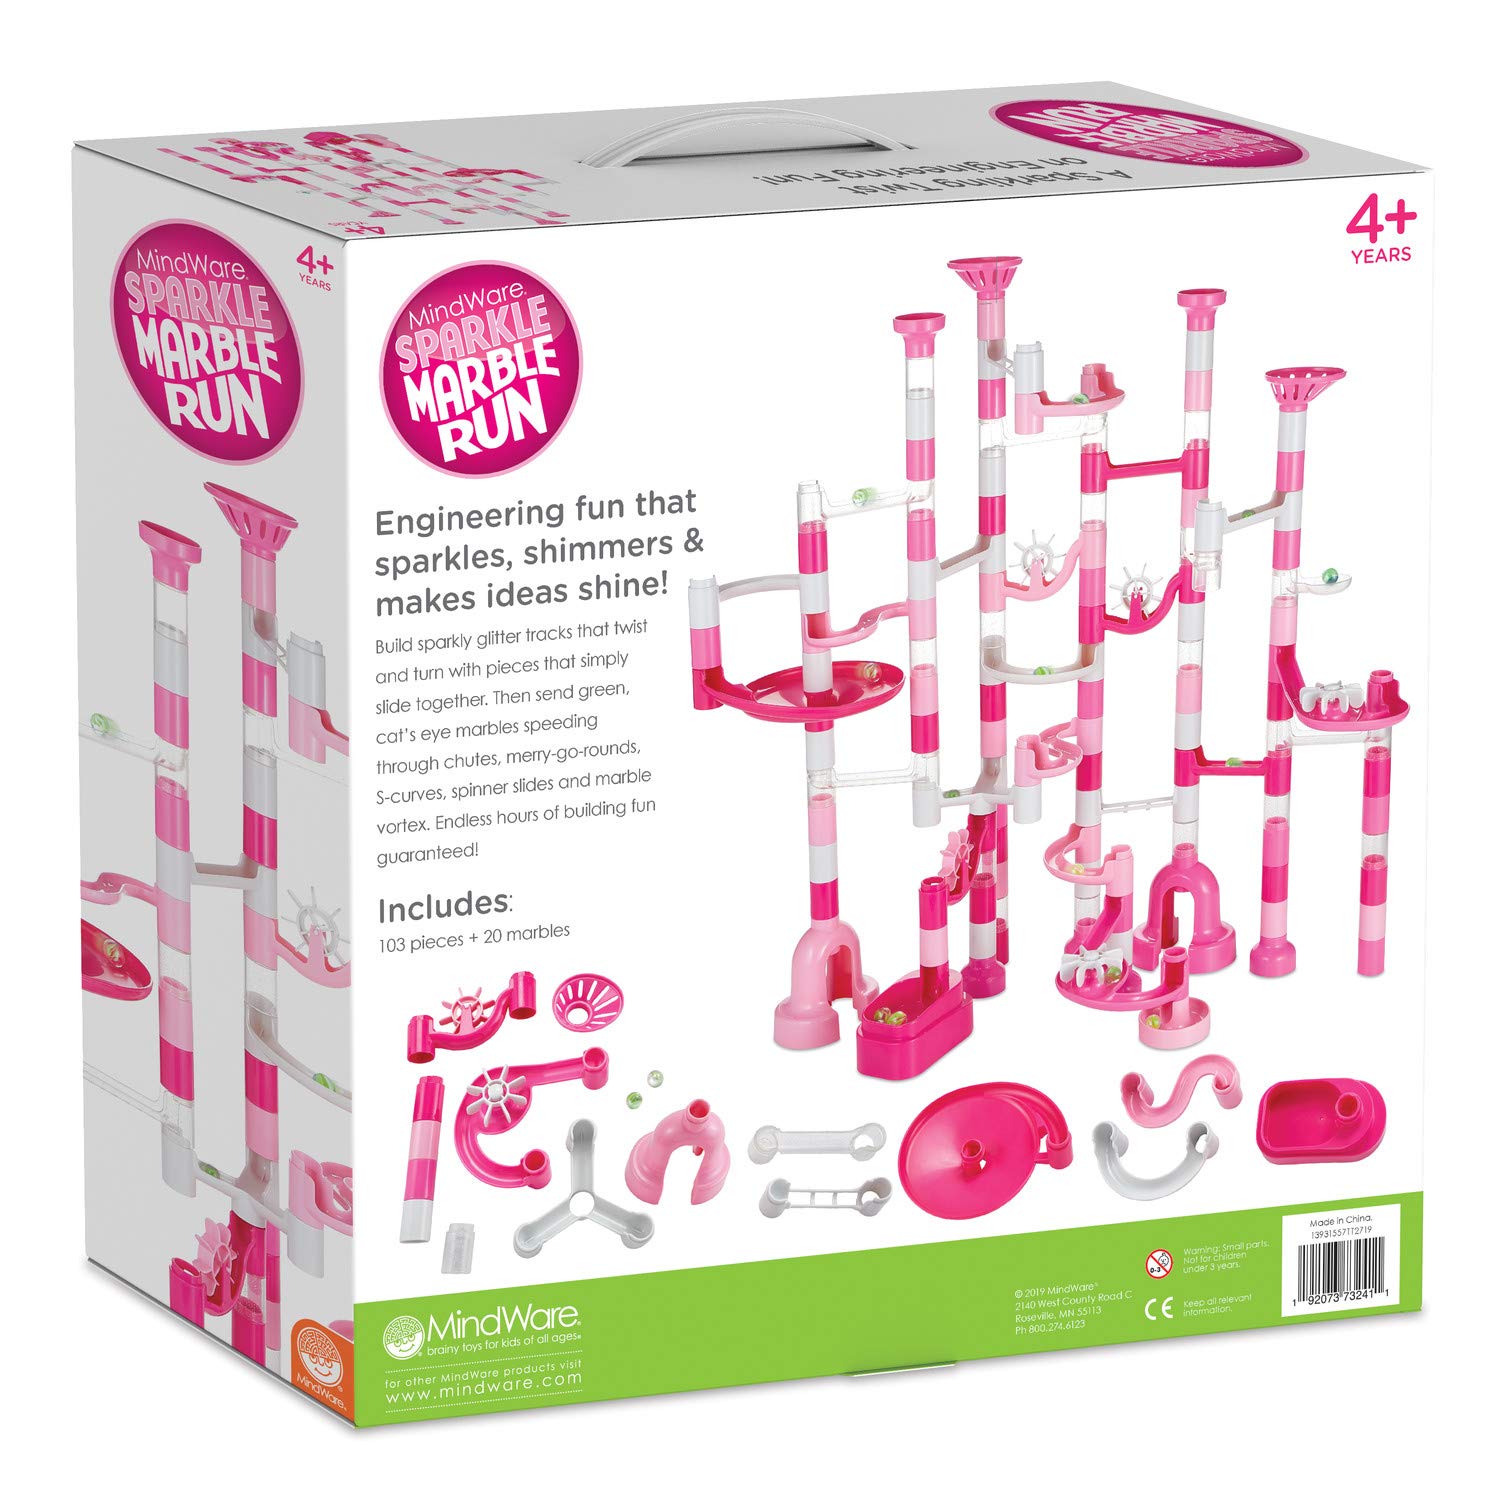 MindWare Sparkle Marble Run Set with 103 Pieces